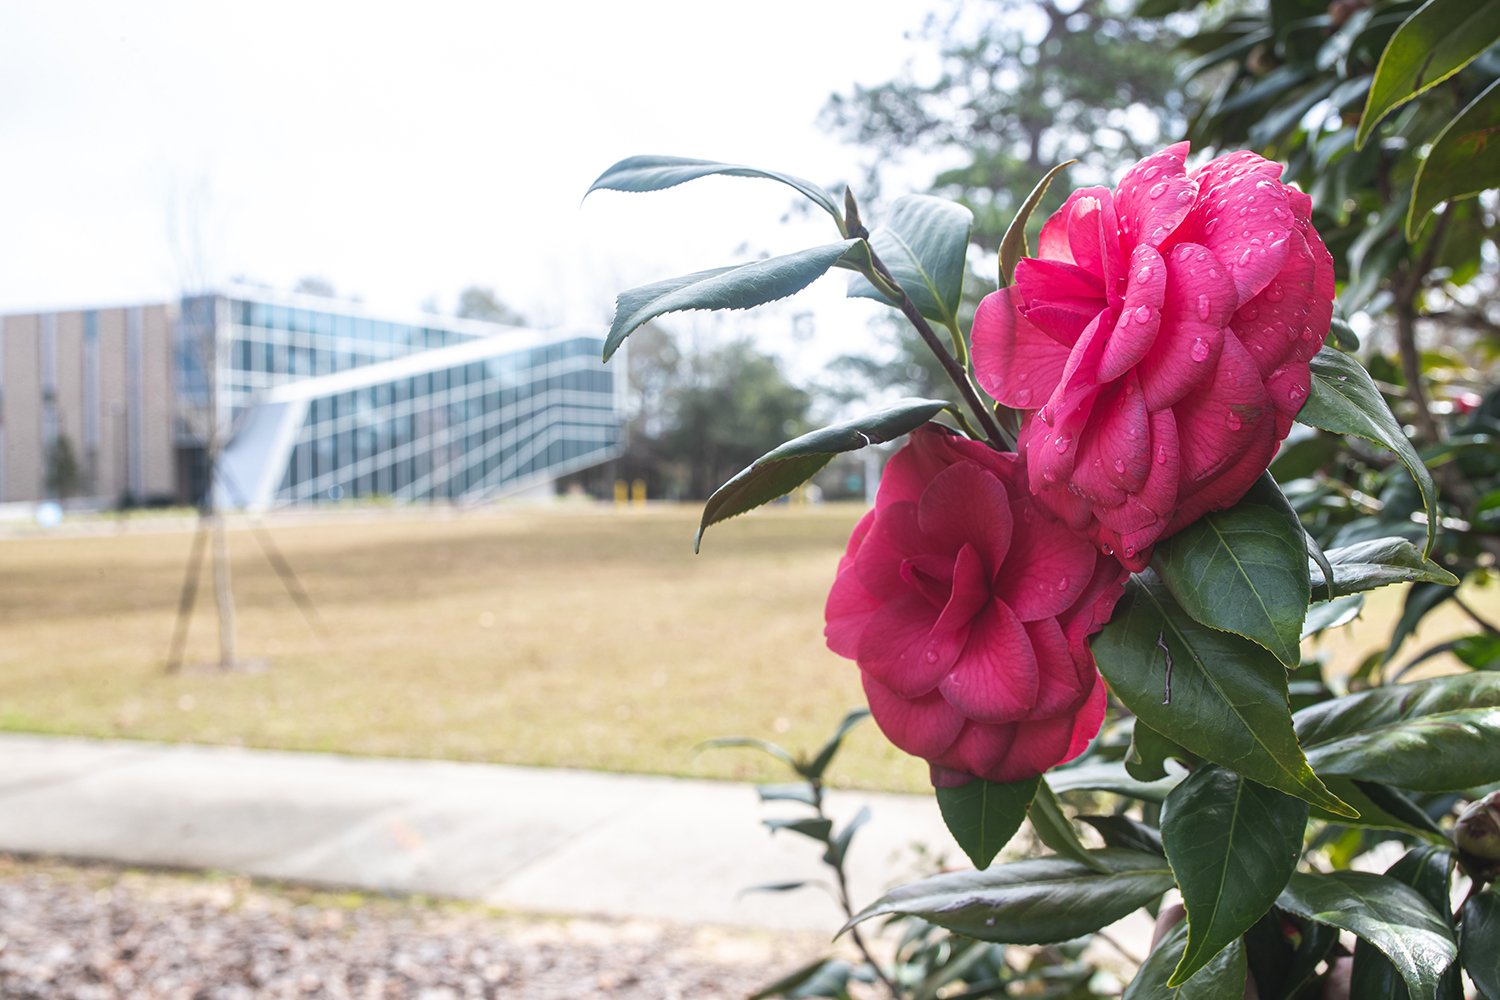 The camelia gardens on UWF's campus display beautiful flowers when in bloom.